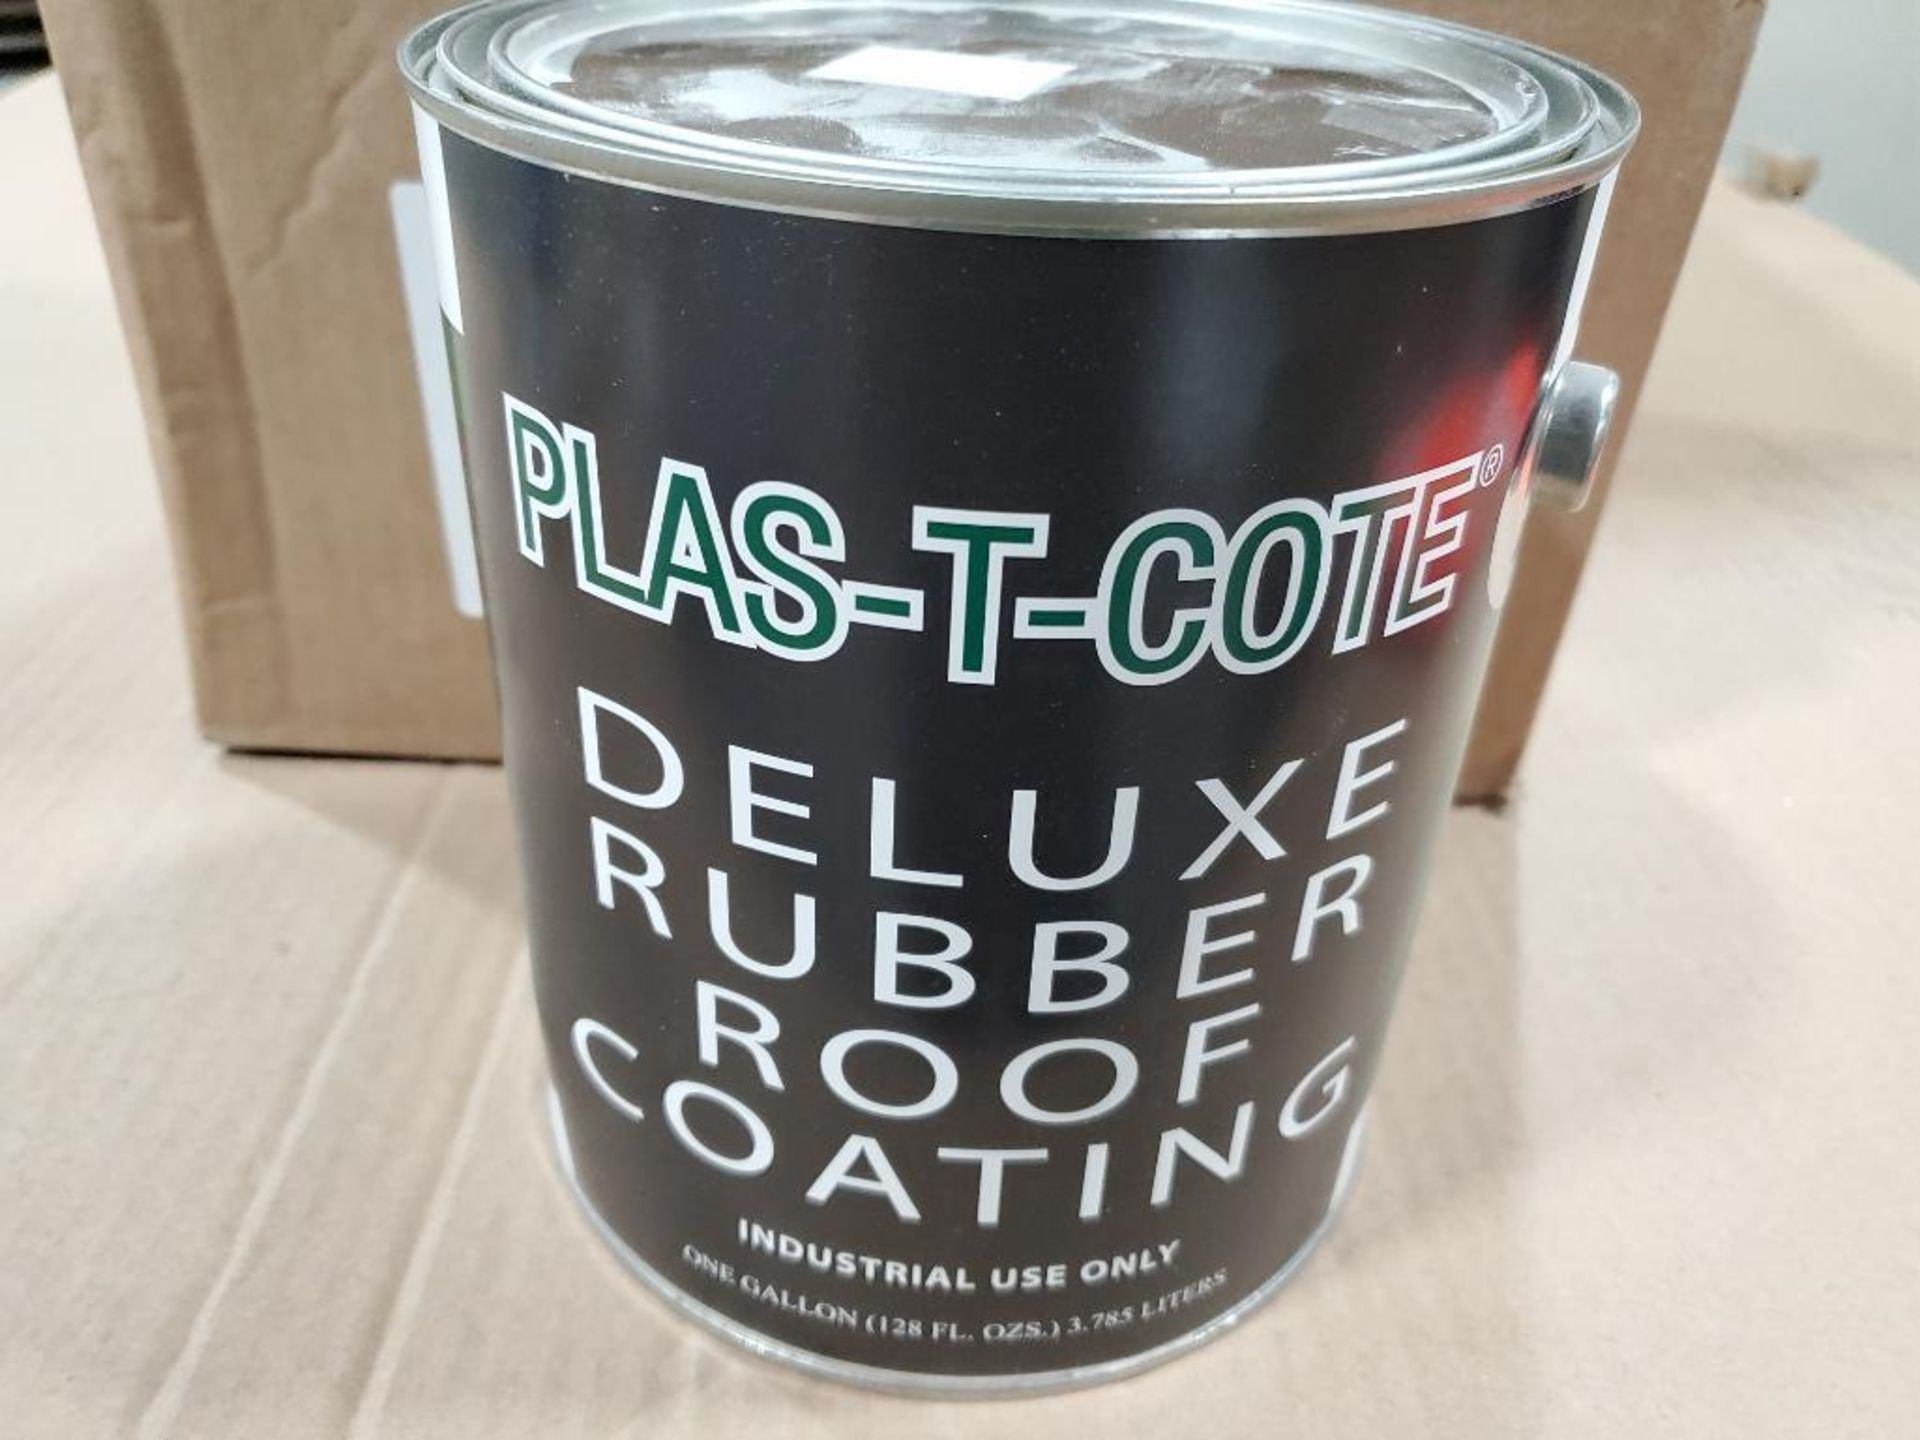 Qty 8 Gallon - Plas-T-Cote deluxe rubber roof coating. 44128. - Image 2 of 2